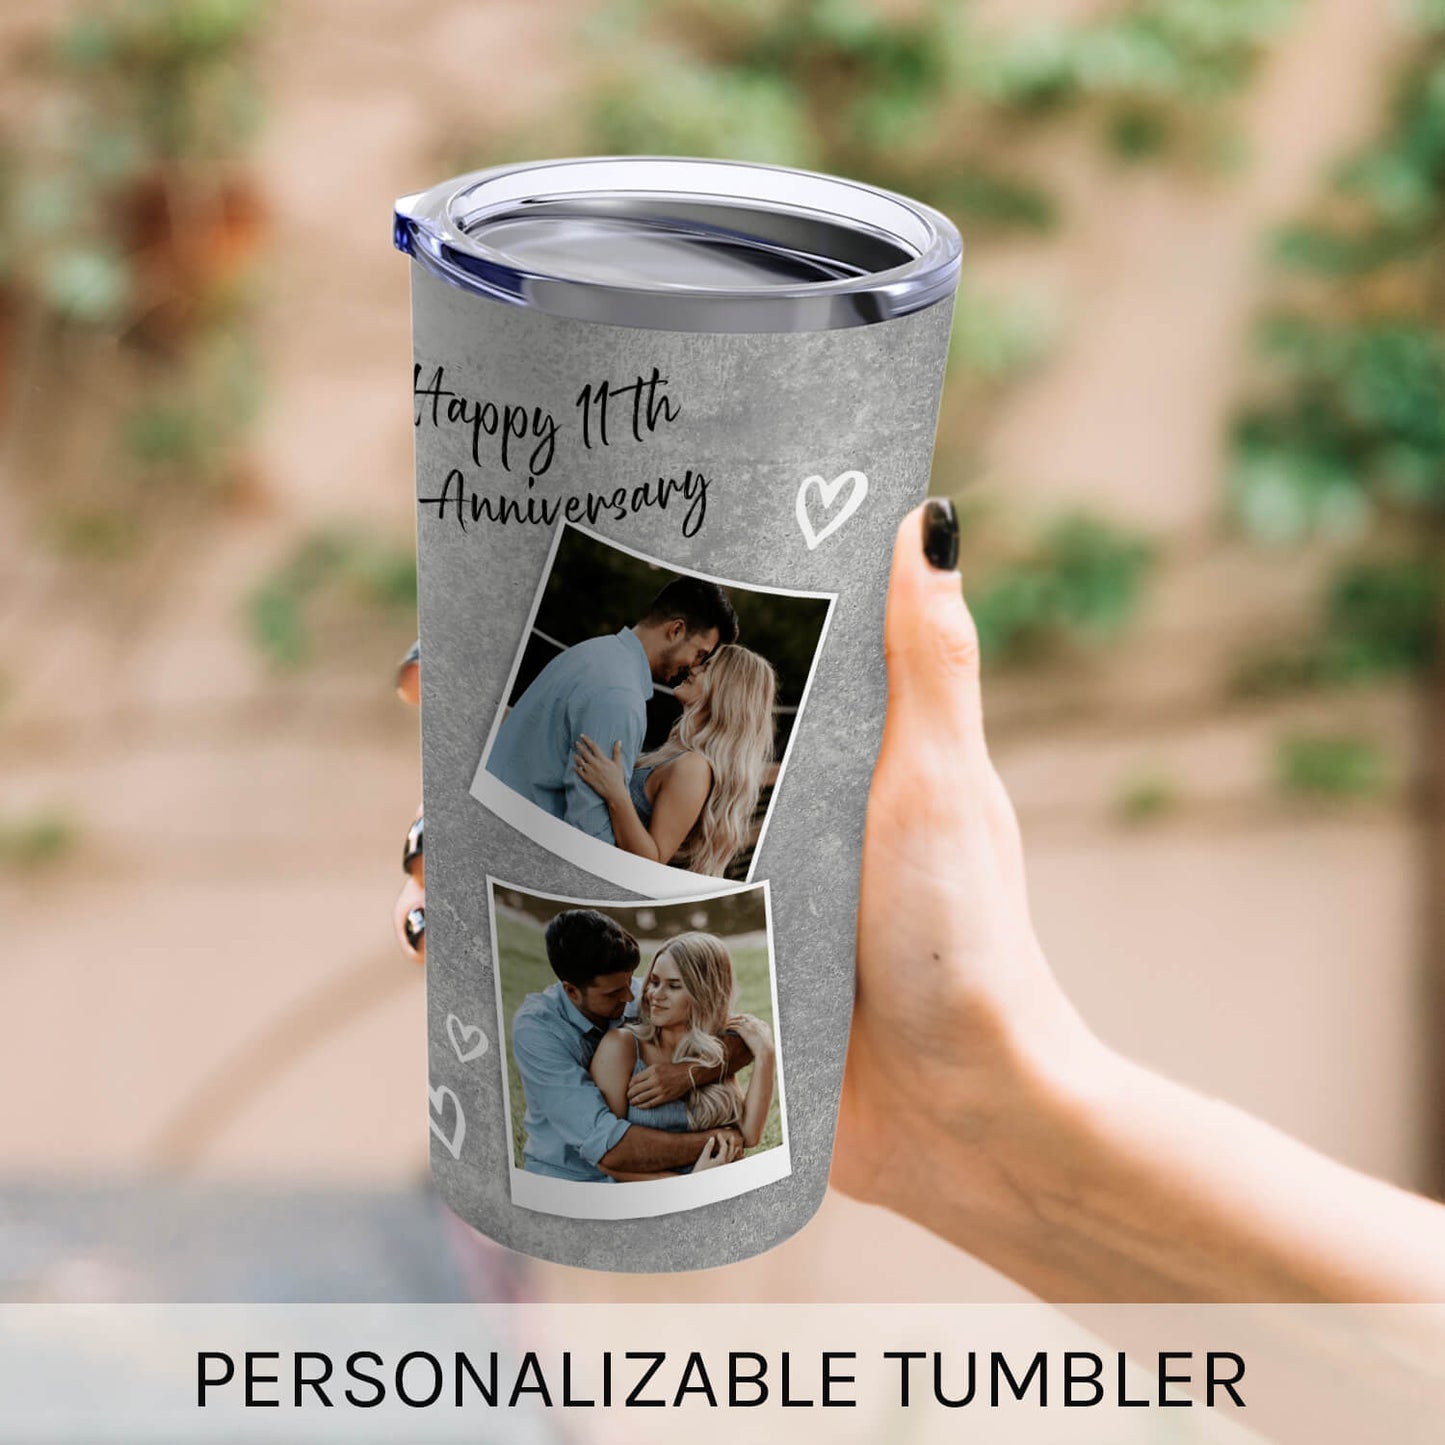 Happy 11th Anniversary - Personalized 11 Year Anniversary gift For Husband or Wife - Custom Tumbler - MyMindfulGifts